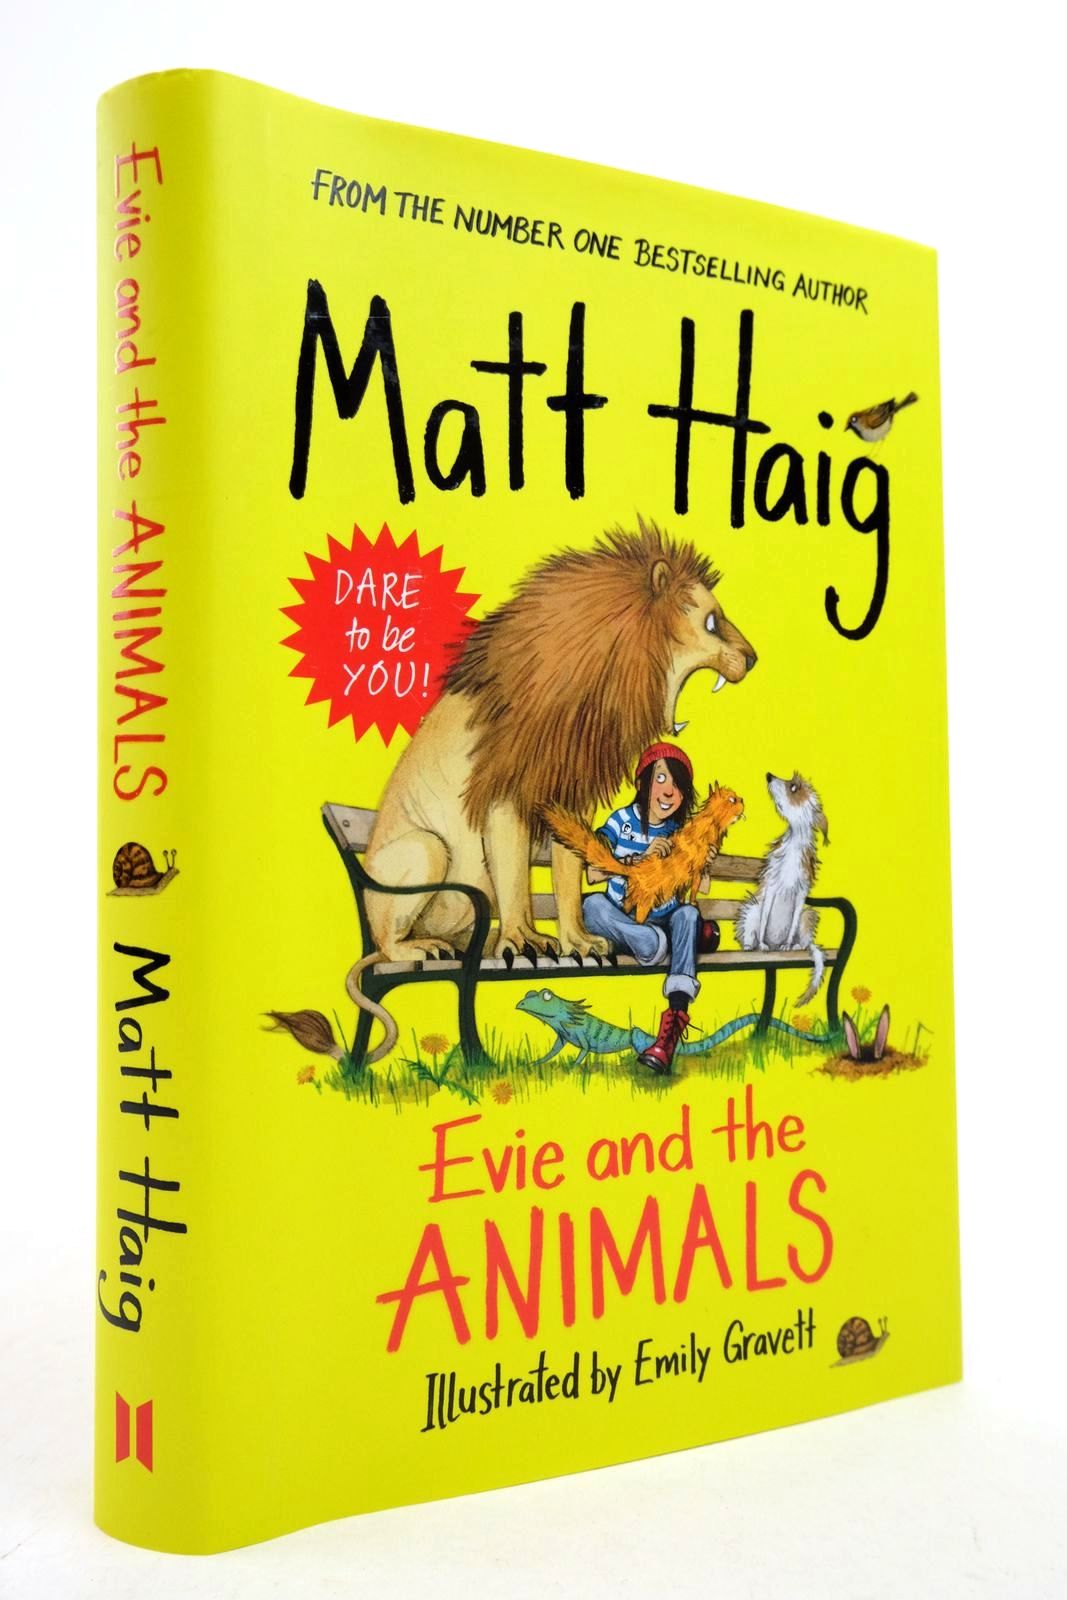 Photo of EVIE AND THE ANIMALS written by Haig, Matt illustrated by Gravett, Emily published by Canongate Books Ltd (STOCK CODE: 2140369)  for sale by Stella & Rose's Books